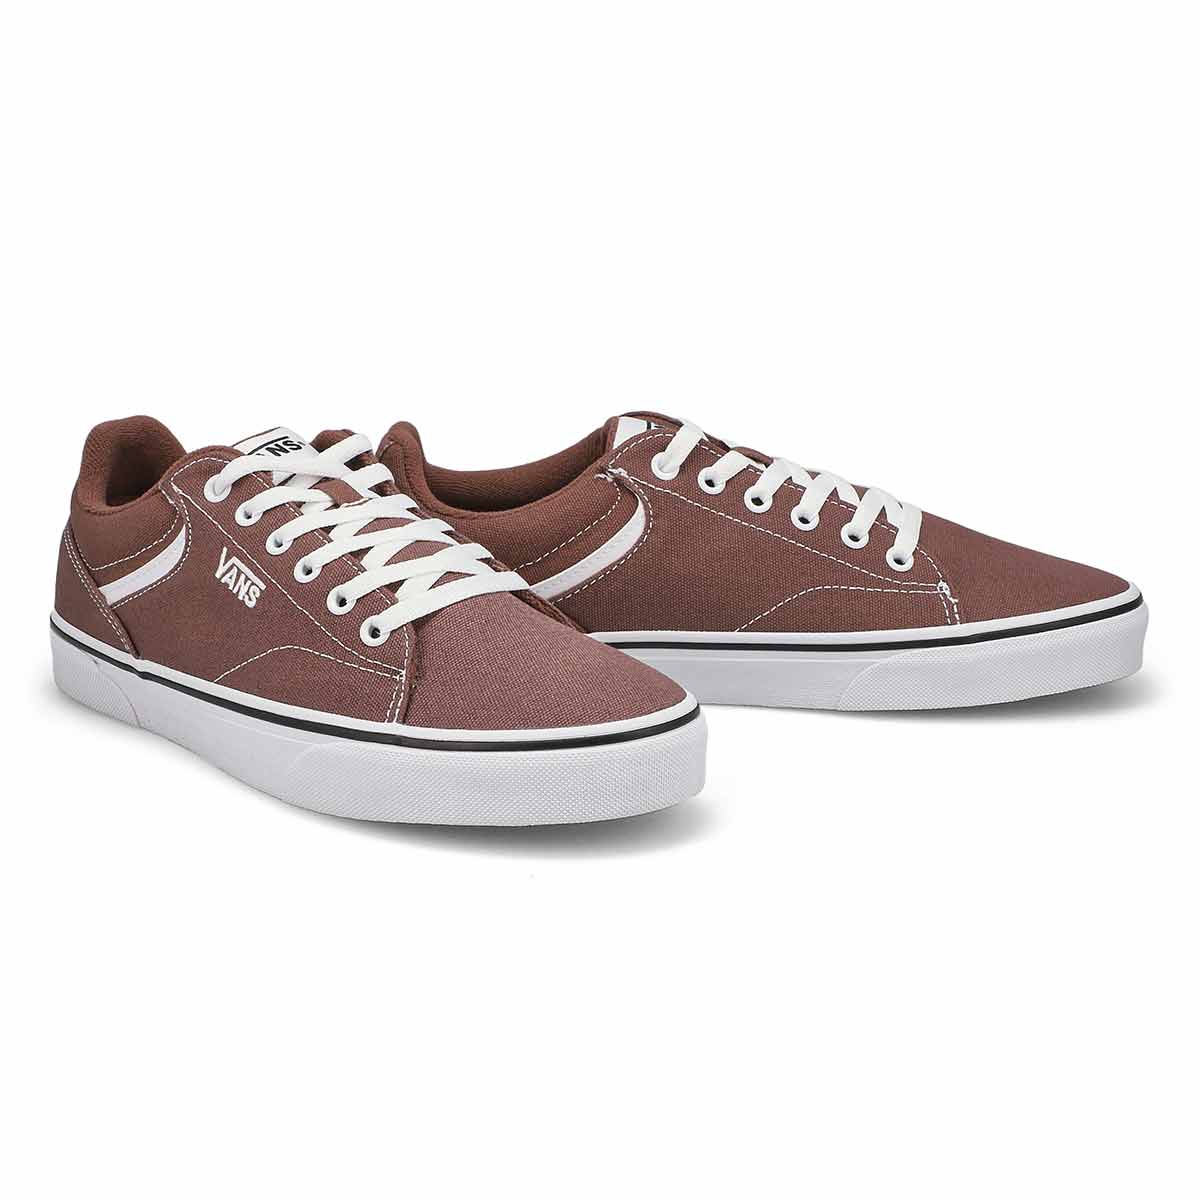 Mens Seldan Lace Up Sneaker - Taupe/White